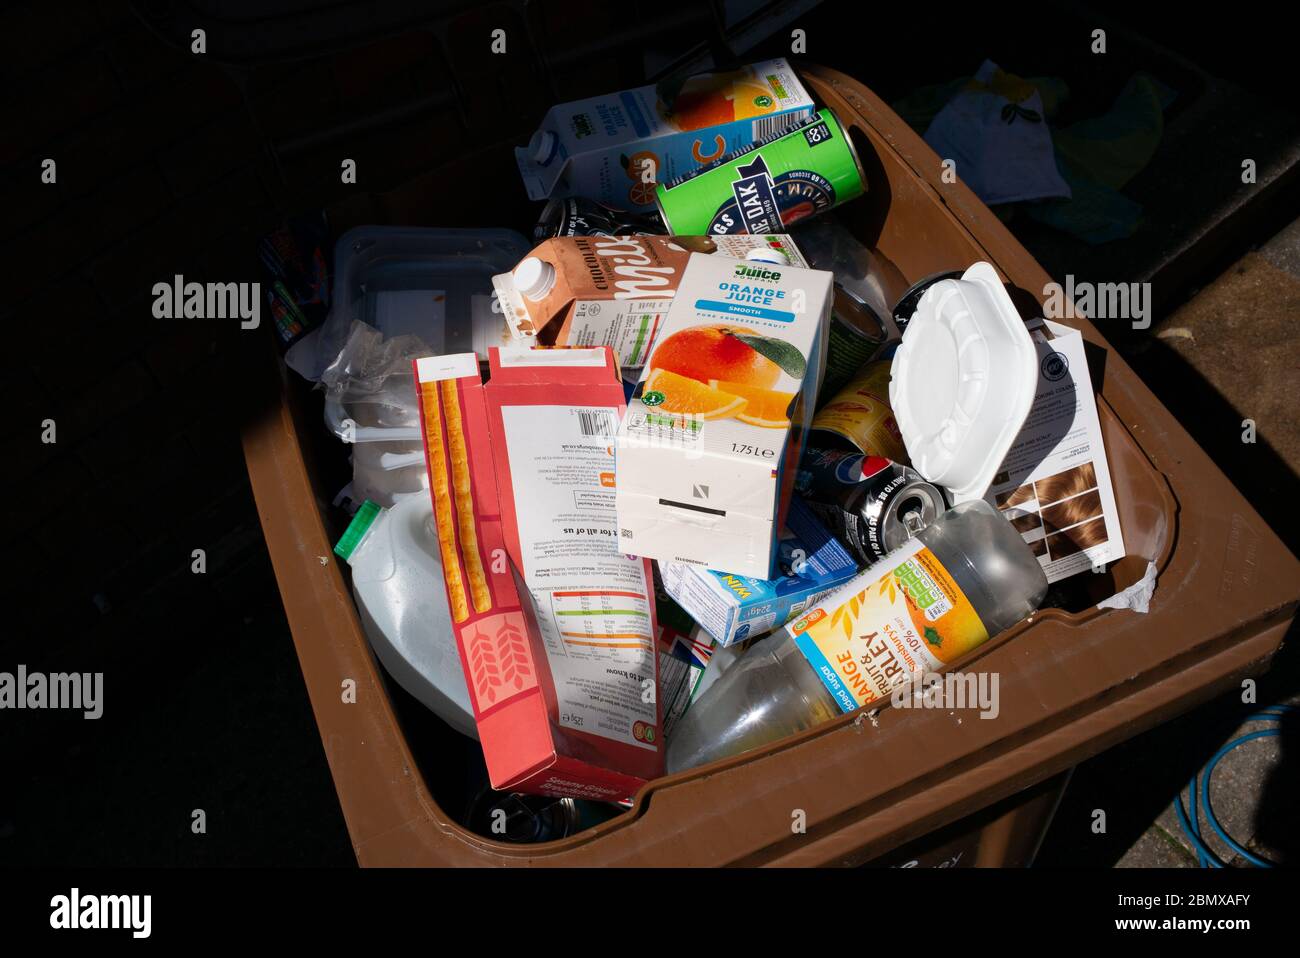 A full recycling bin due to extra waste whilst in lockdown during the coronavirus pandemic. Stock Photo